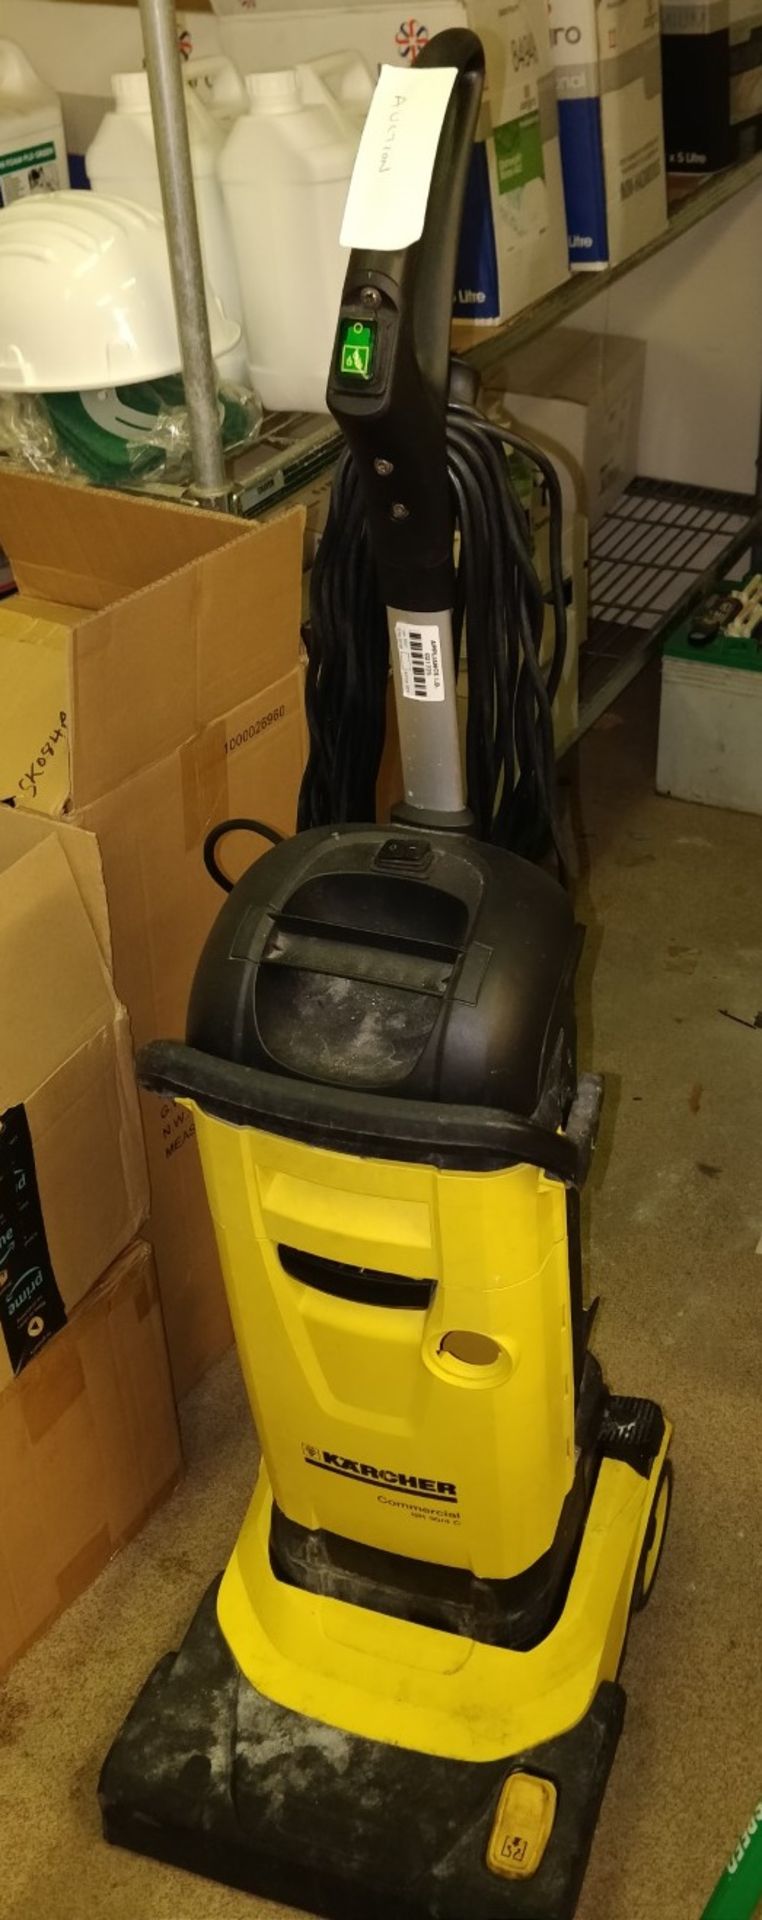 2 x Karcher BR 30/4 C Floor Scrubber Dryer - Mains Powered - Approx RRP £1800 - Missing Parts -